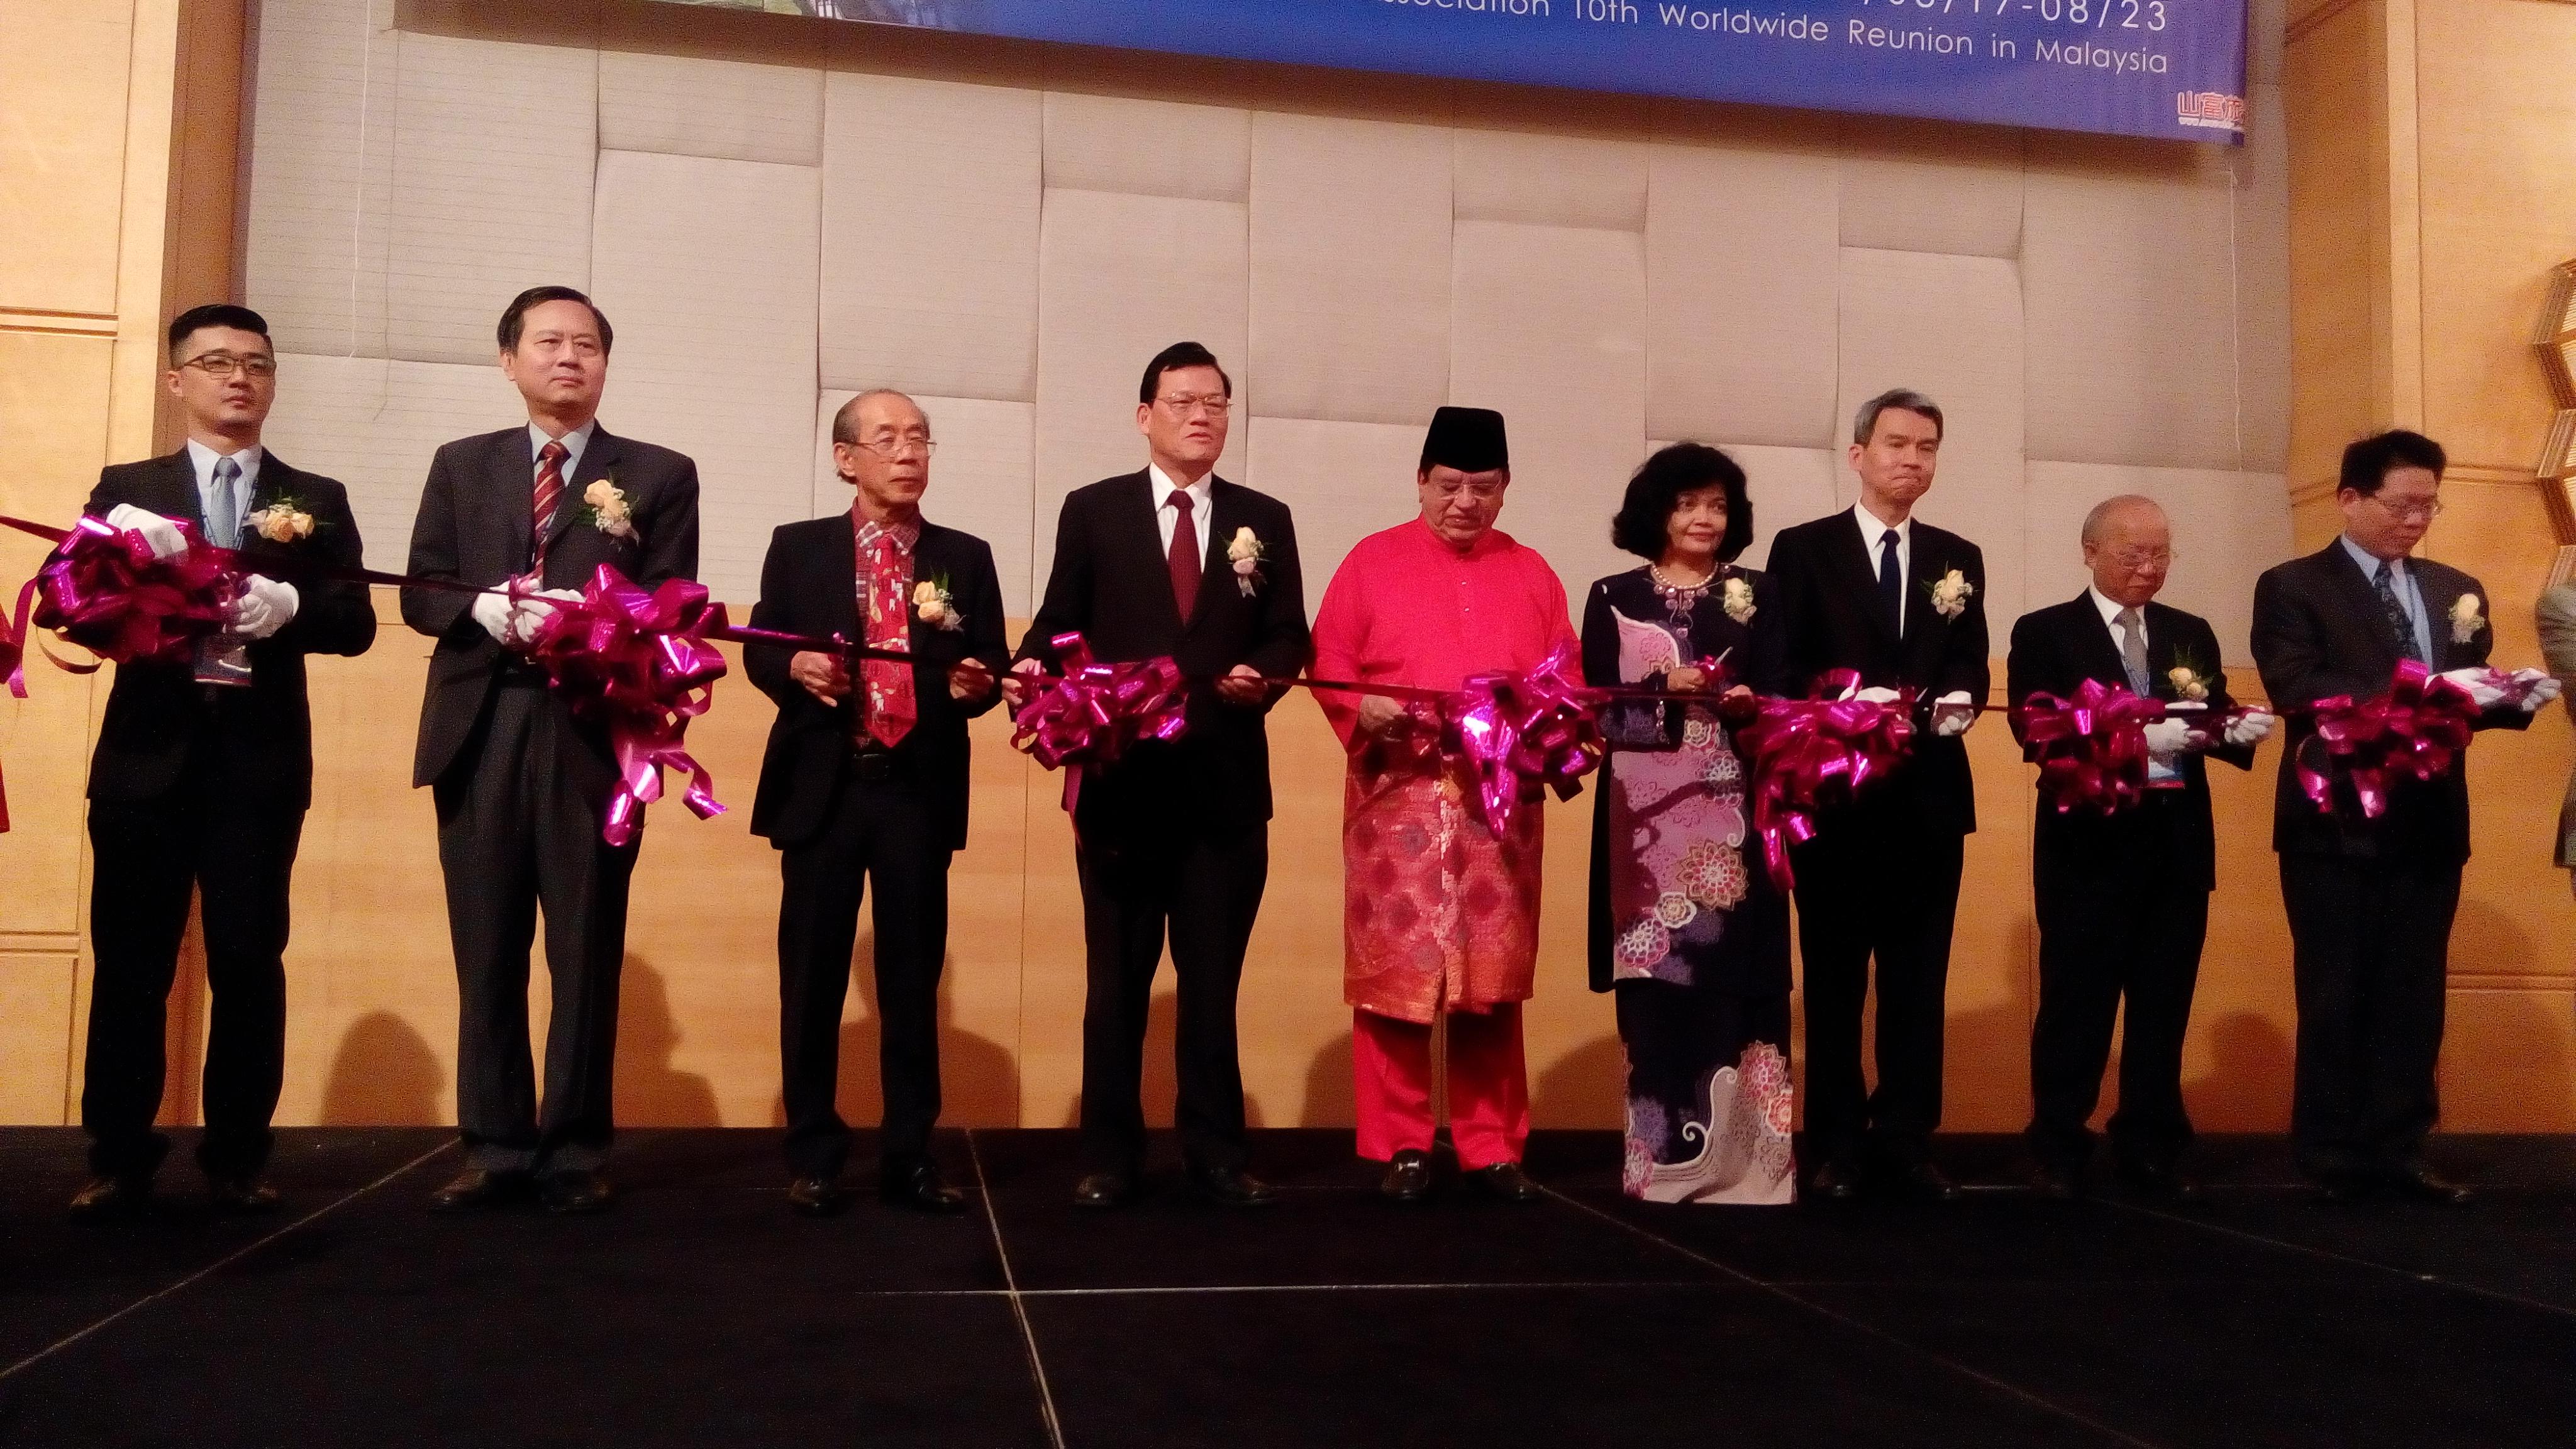 21 AUGUST 2016.Representative and Head of Mission James Chang Chi-ping, Minister of Federal Territories, Datuk Seri Tengku Adnan Tengku Mansor (centre) and President National Defence Medical Centre (NDMC) Alumni Association Taiwan, Prof. Wing Yiu Lui (second left) during National Defence Medical Centre (NDMC) 10th Worldwide Reunion to join the ribbon-cutting ceremony.

